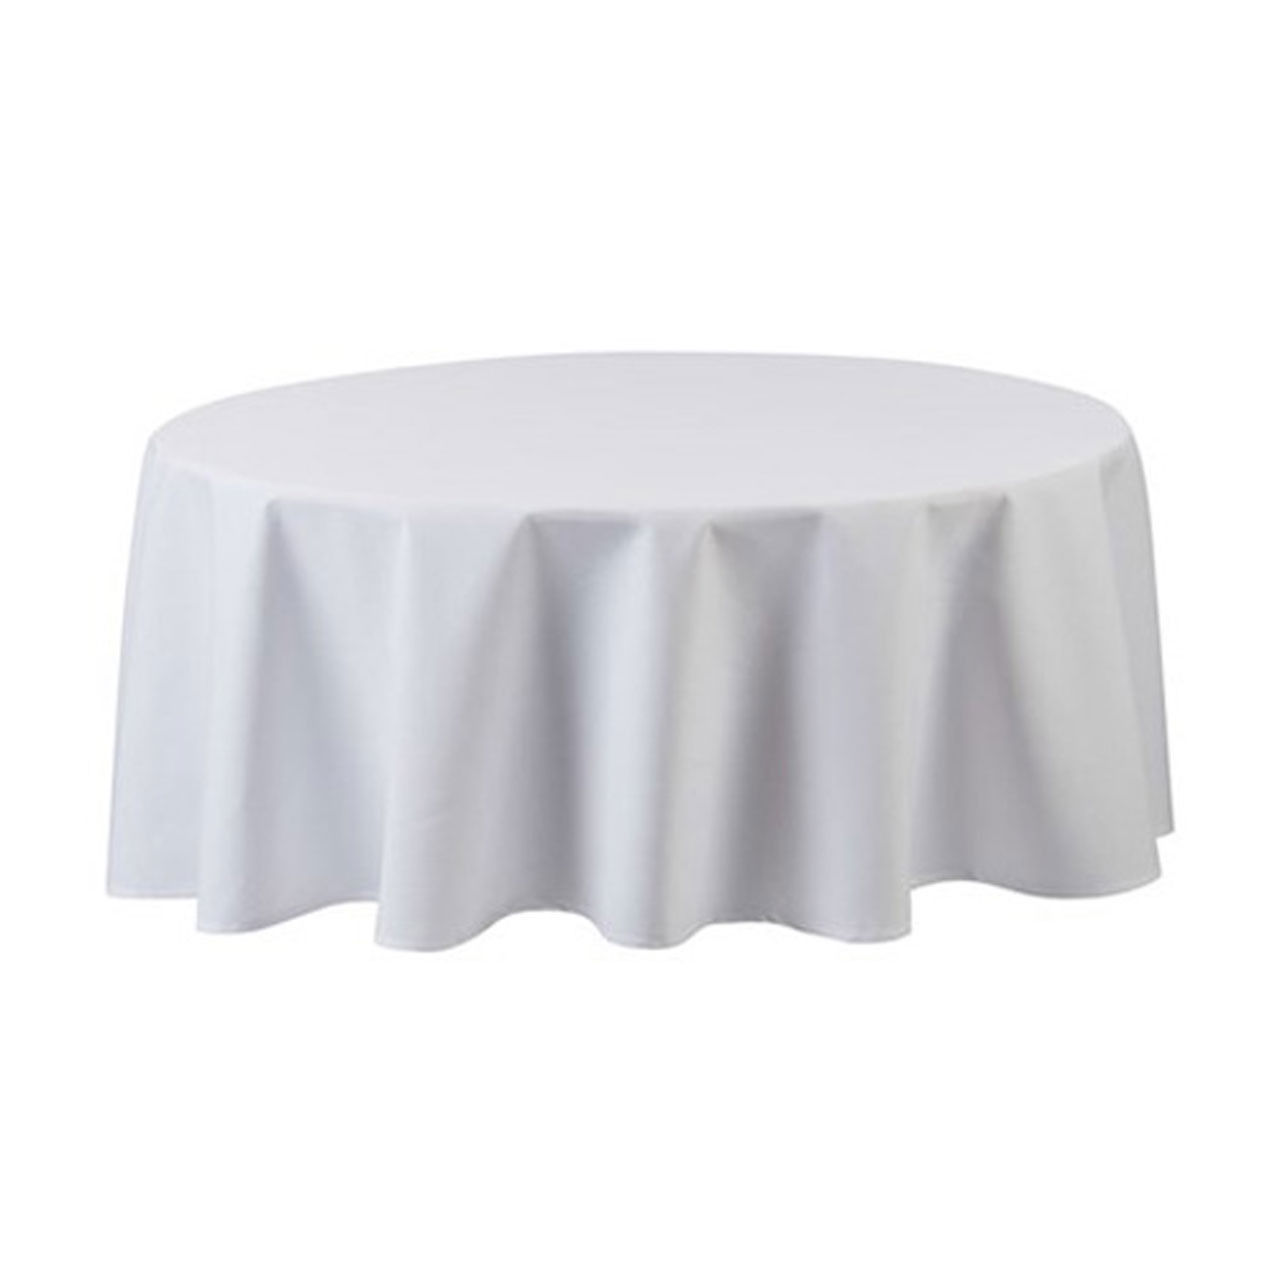 What finish does the 90 round tablecloth, made from MJS Spun Polyester, have?